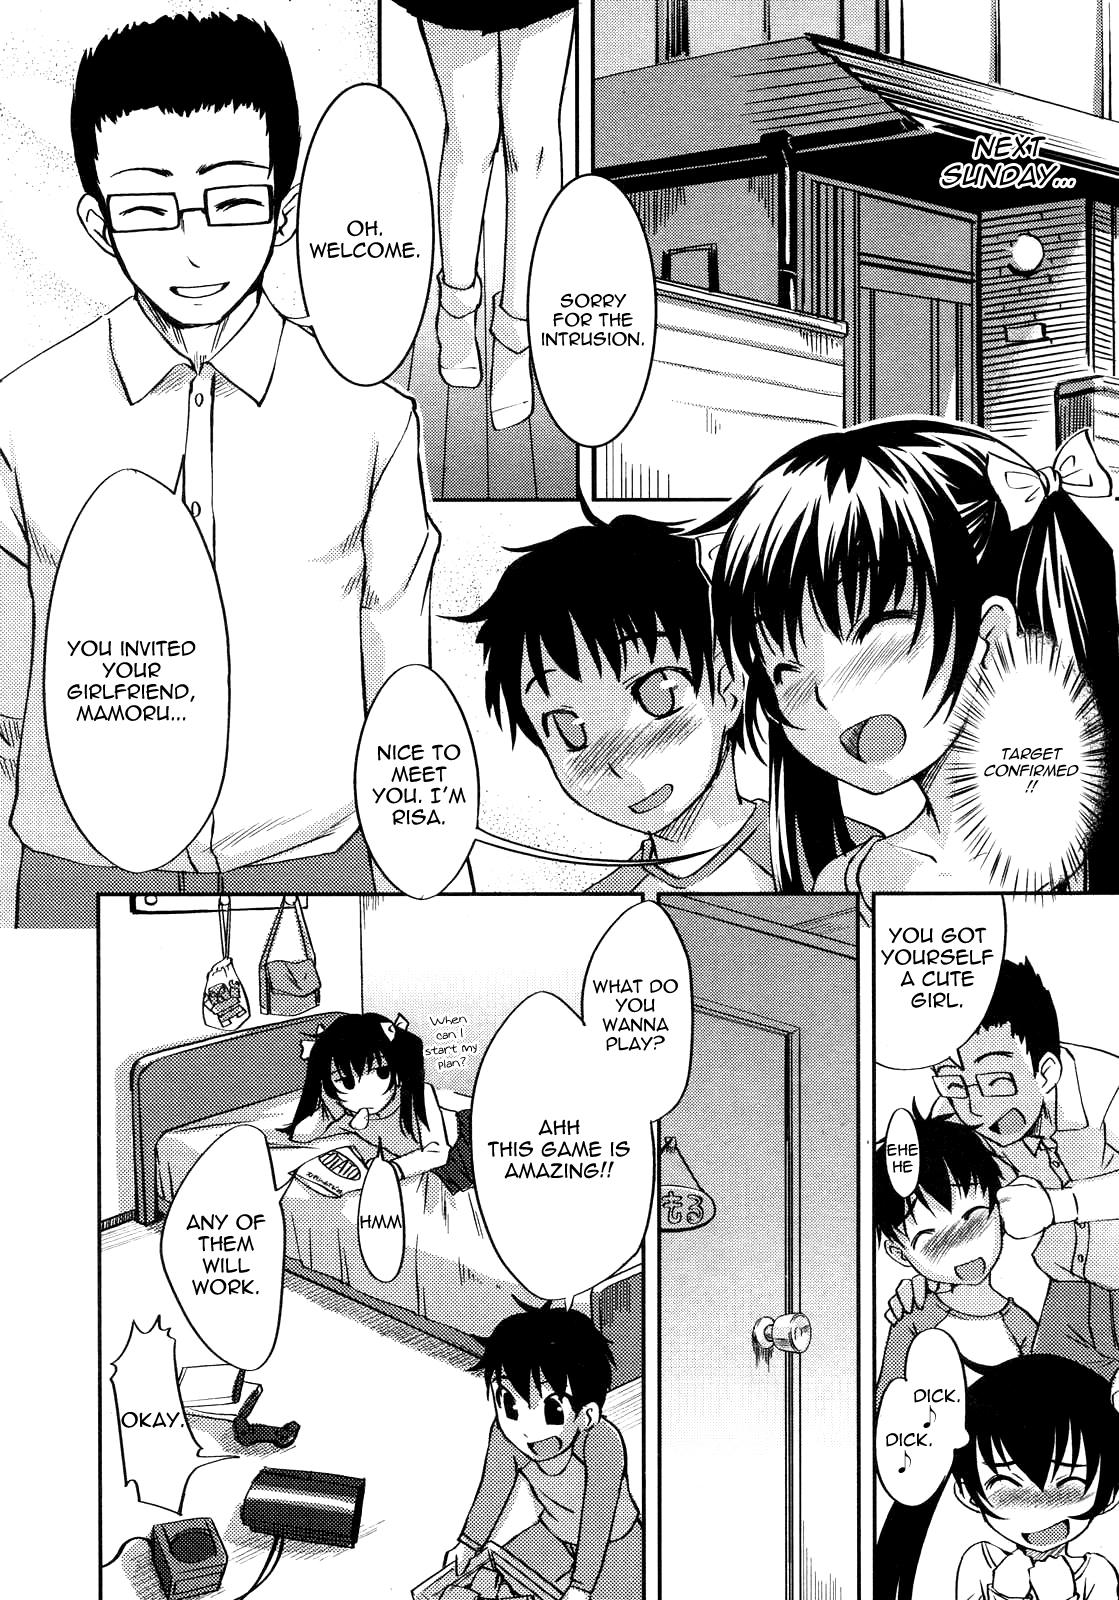 Making Love Porn Otona No Jouken | Requirements of an Adult Glam - Page 8